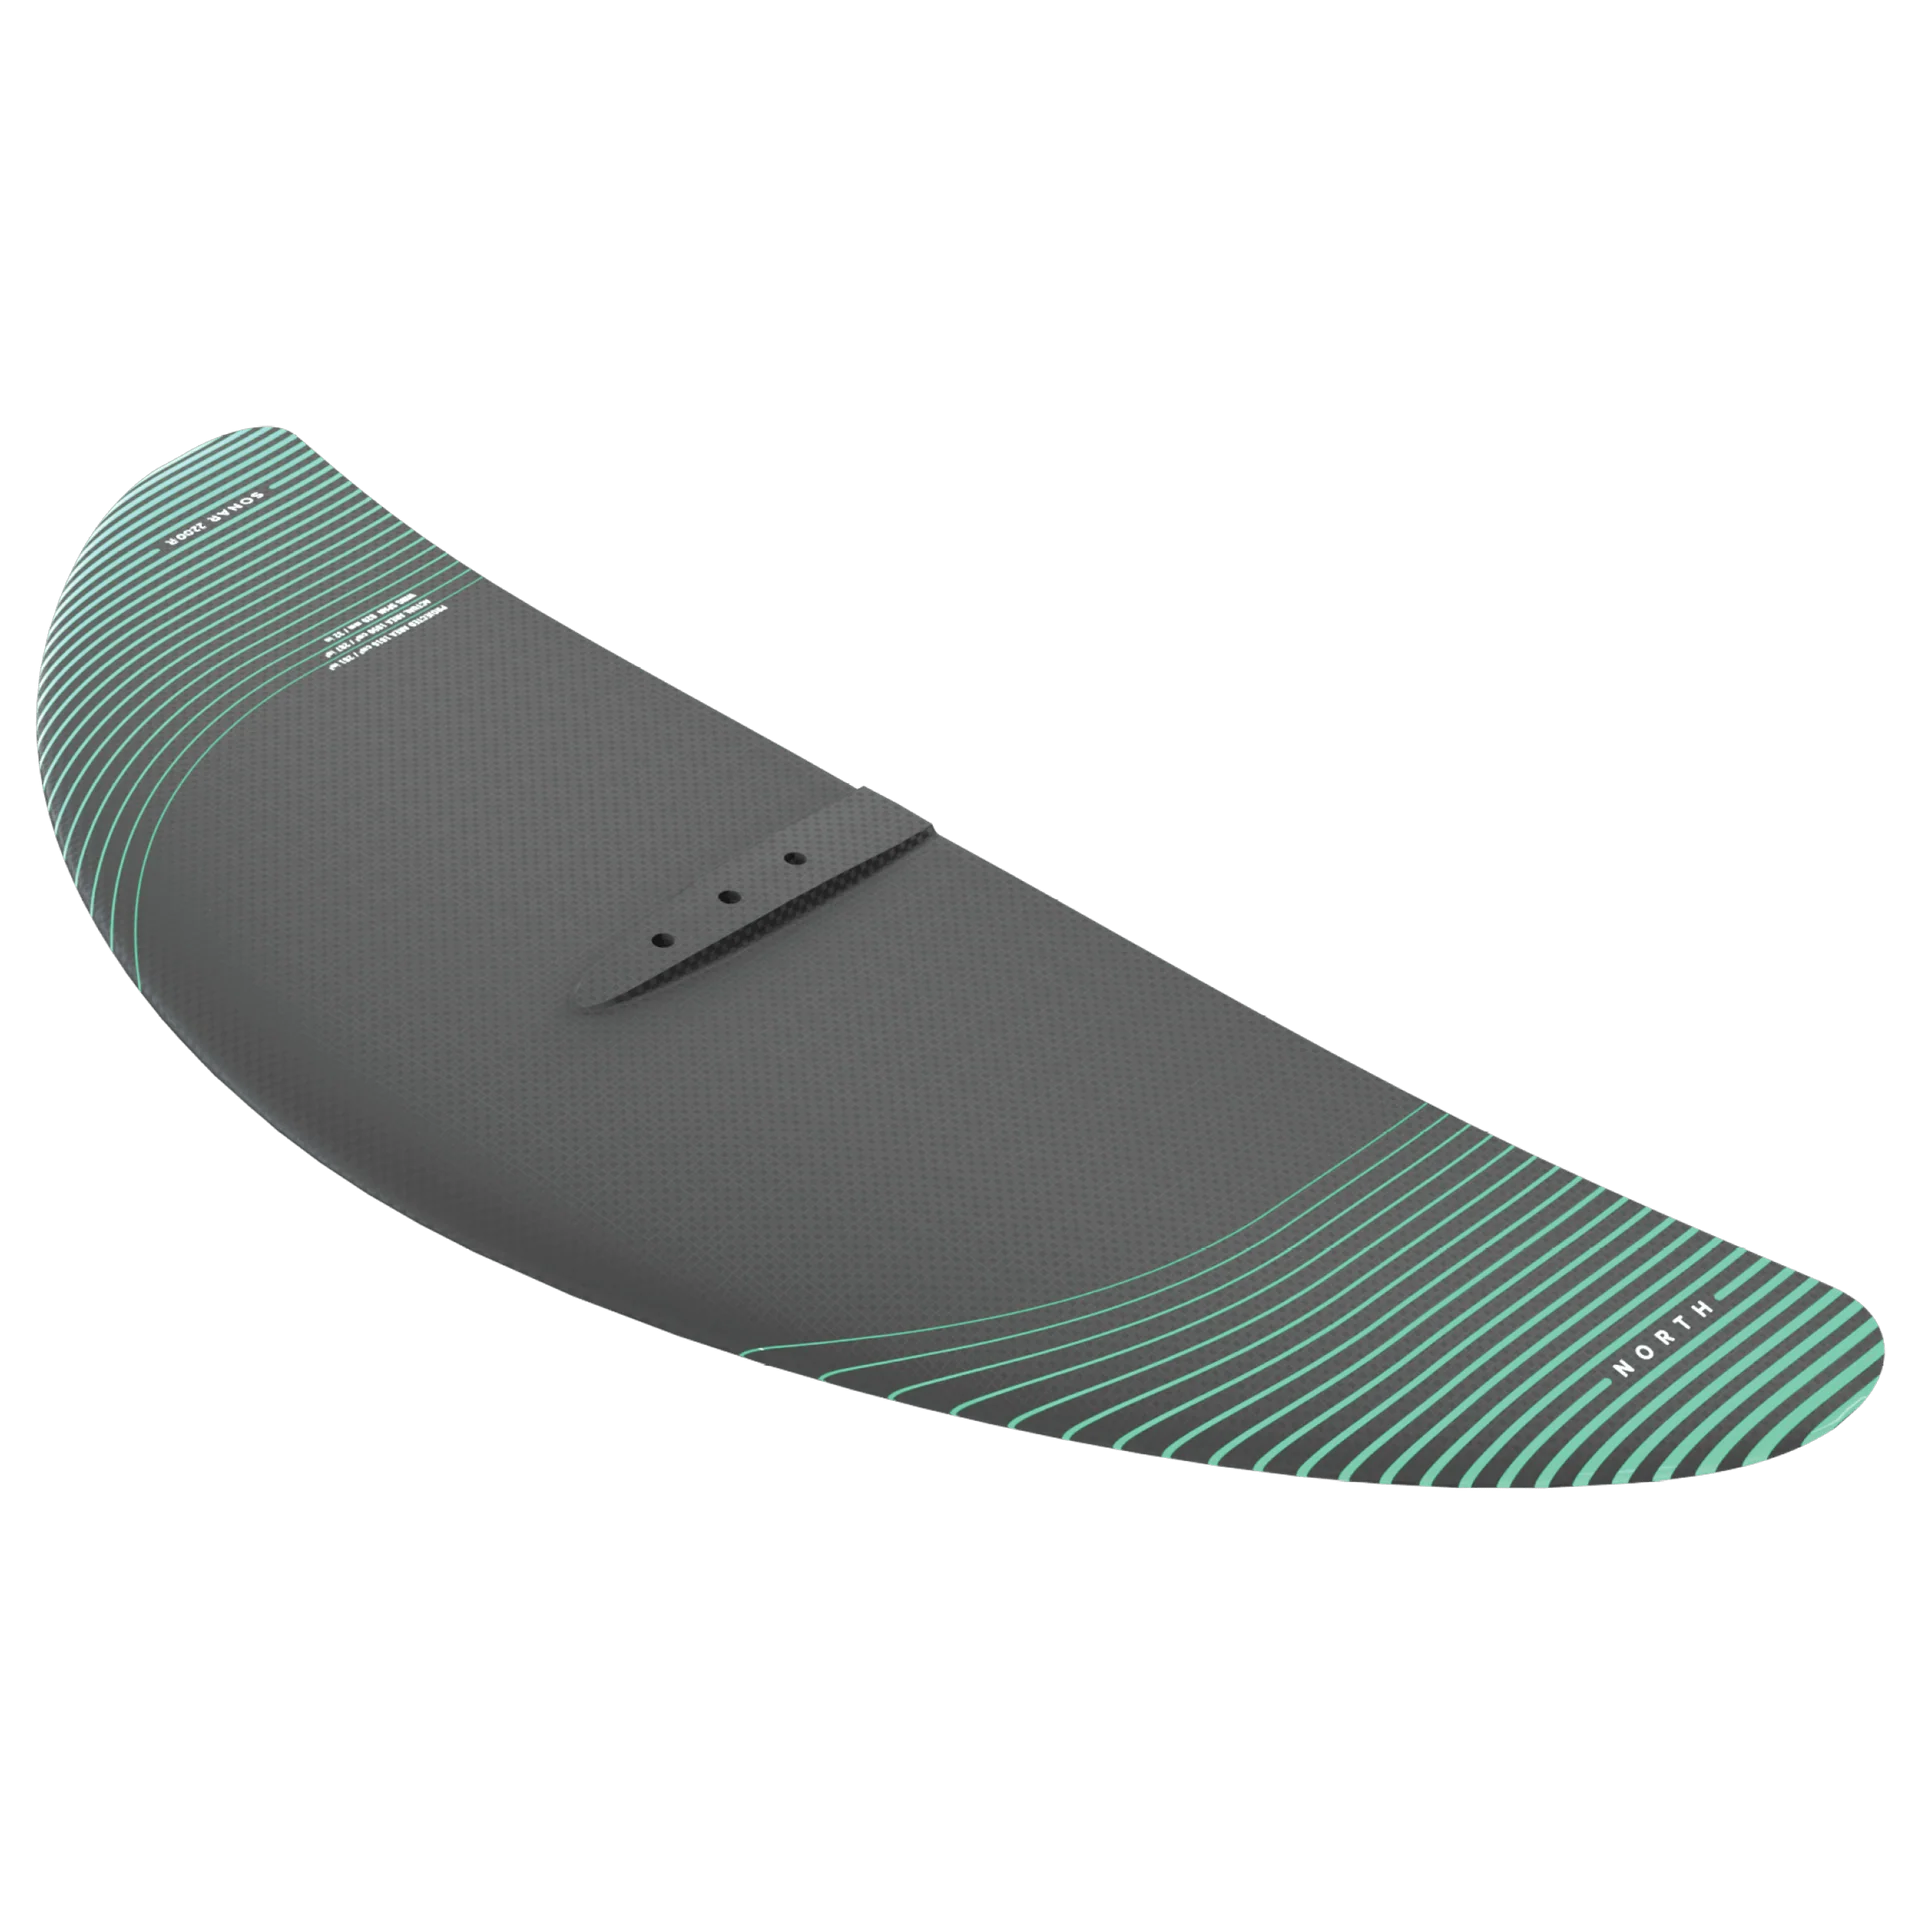 SONAR 2200R FRONT WING